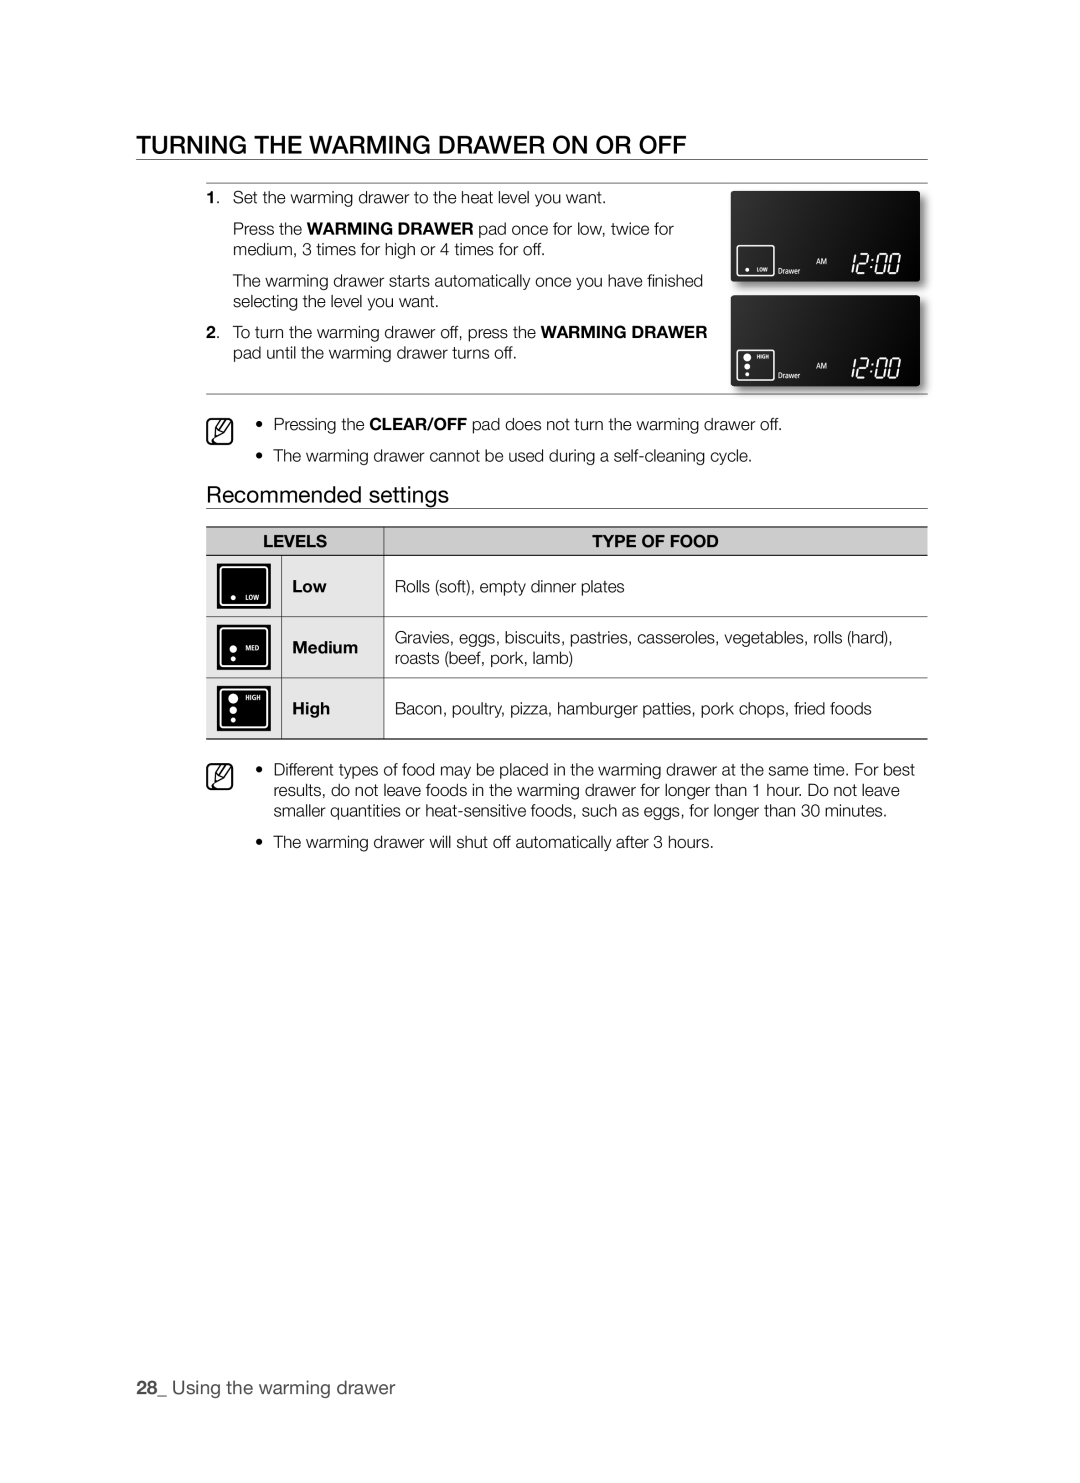 Samsung FTQ307NWGX user manual Turning the warming drawer on or off, Recommended settings, Using the warming drawer 